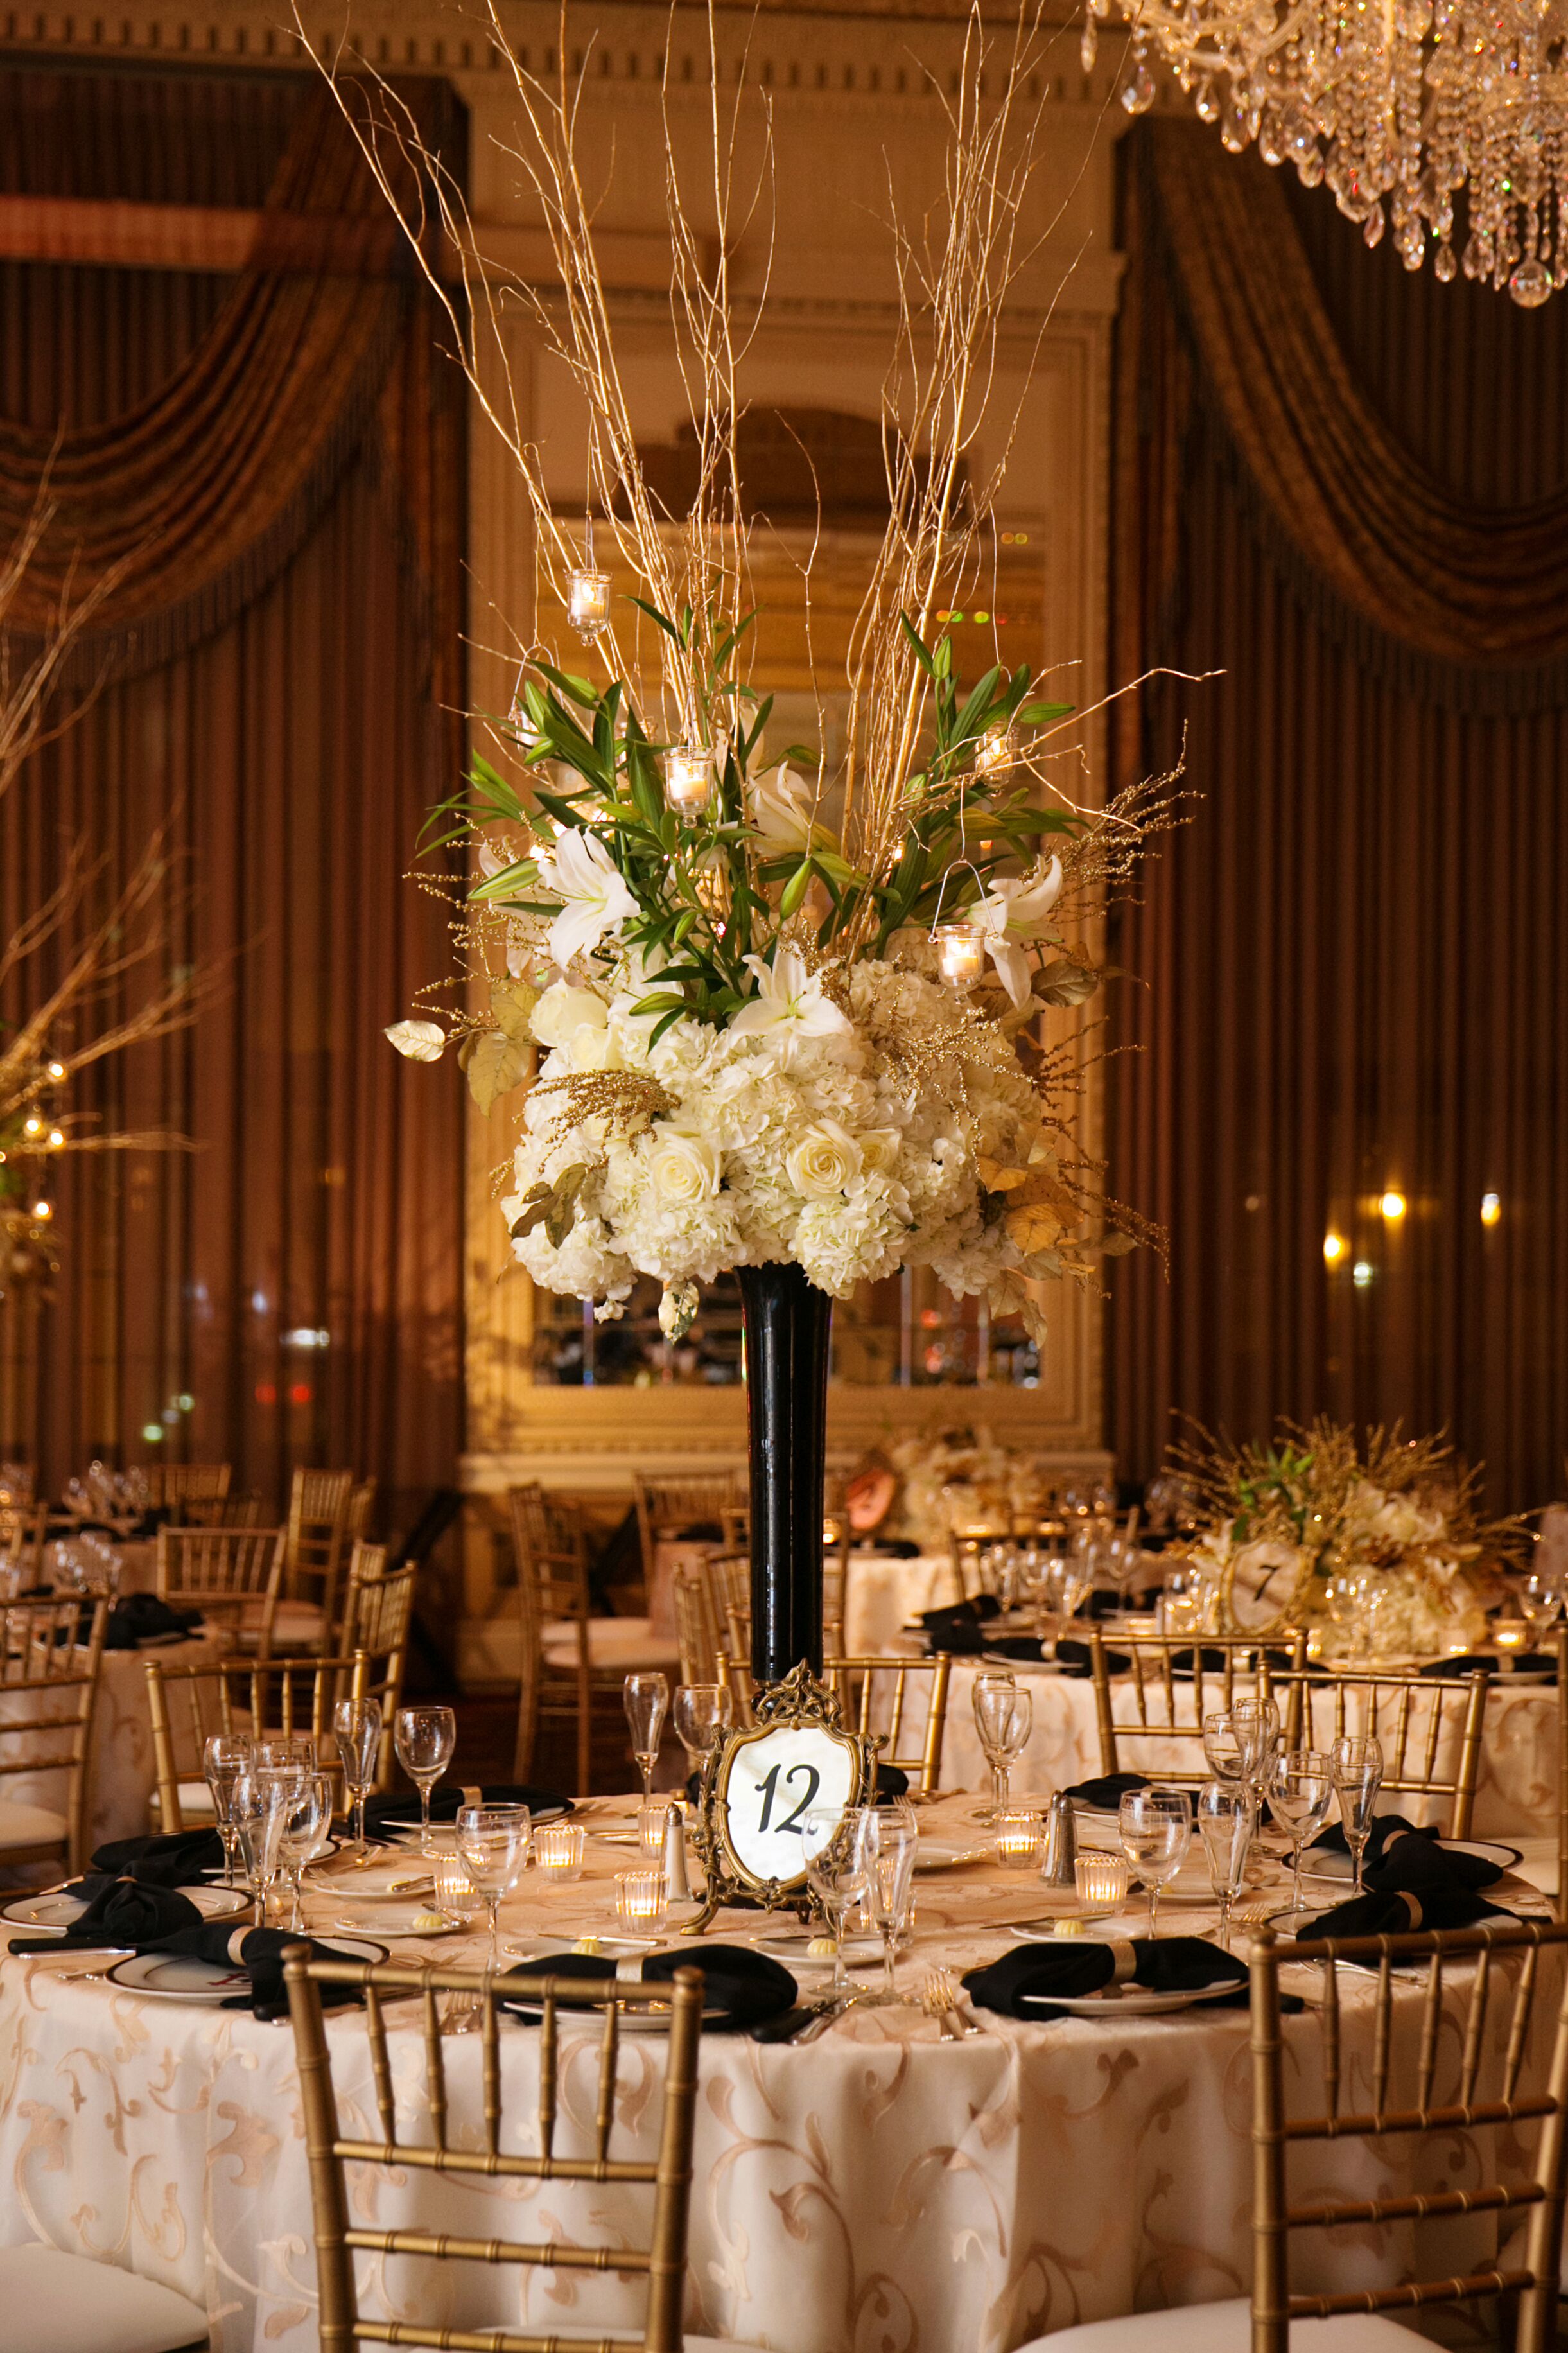 17 Awesome Black and Gold Wedding Centerpieces